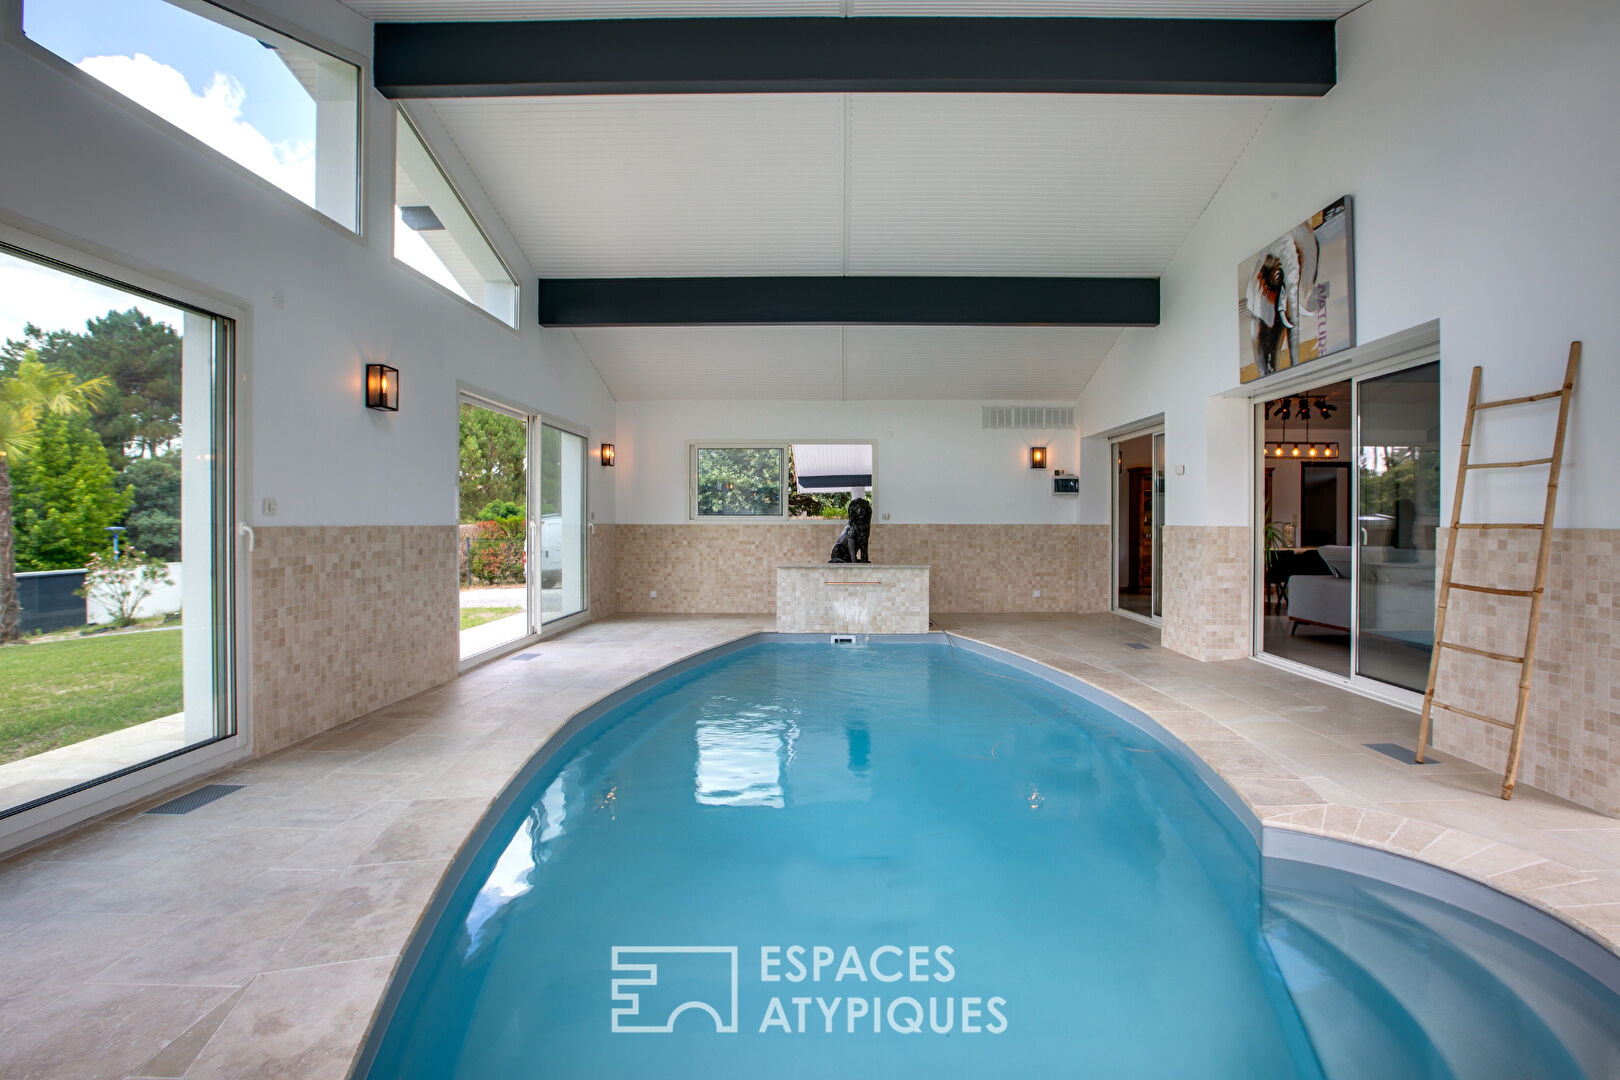 Architect-designed house with indoor swimming pool